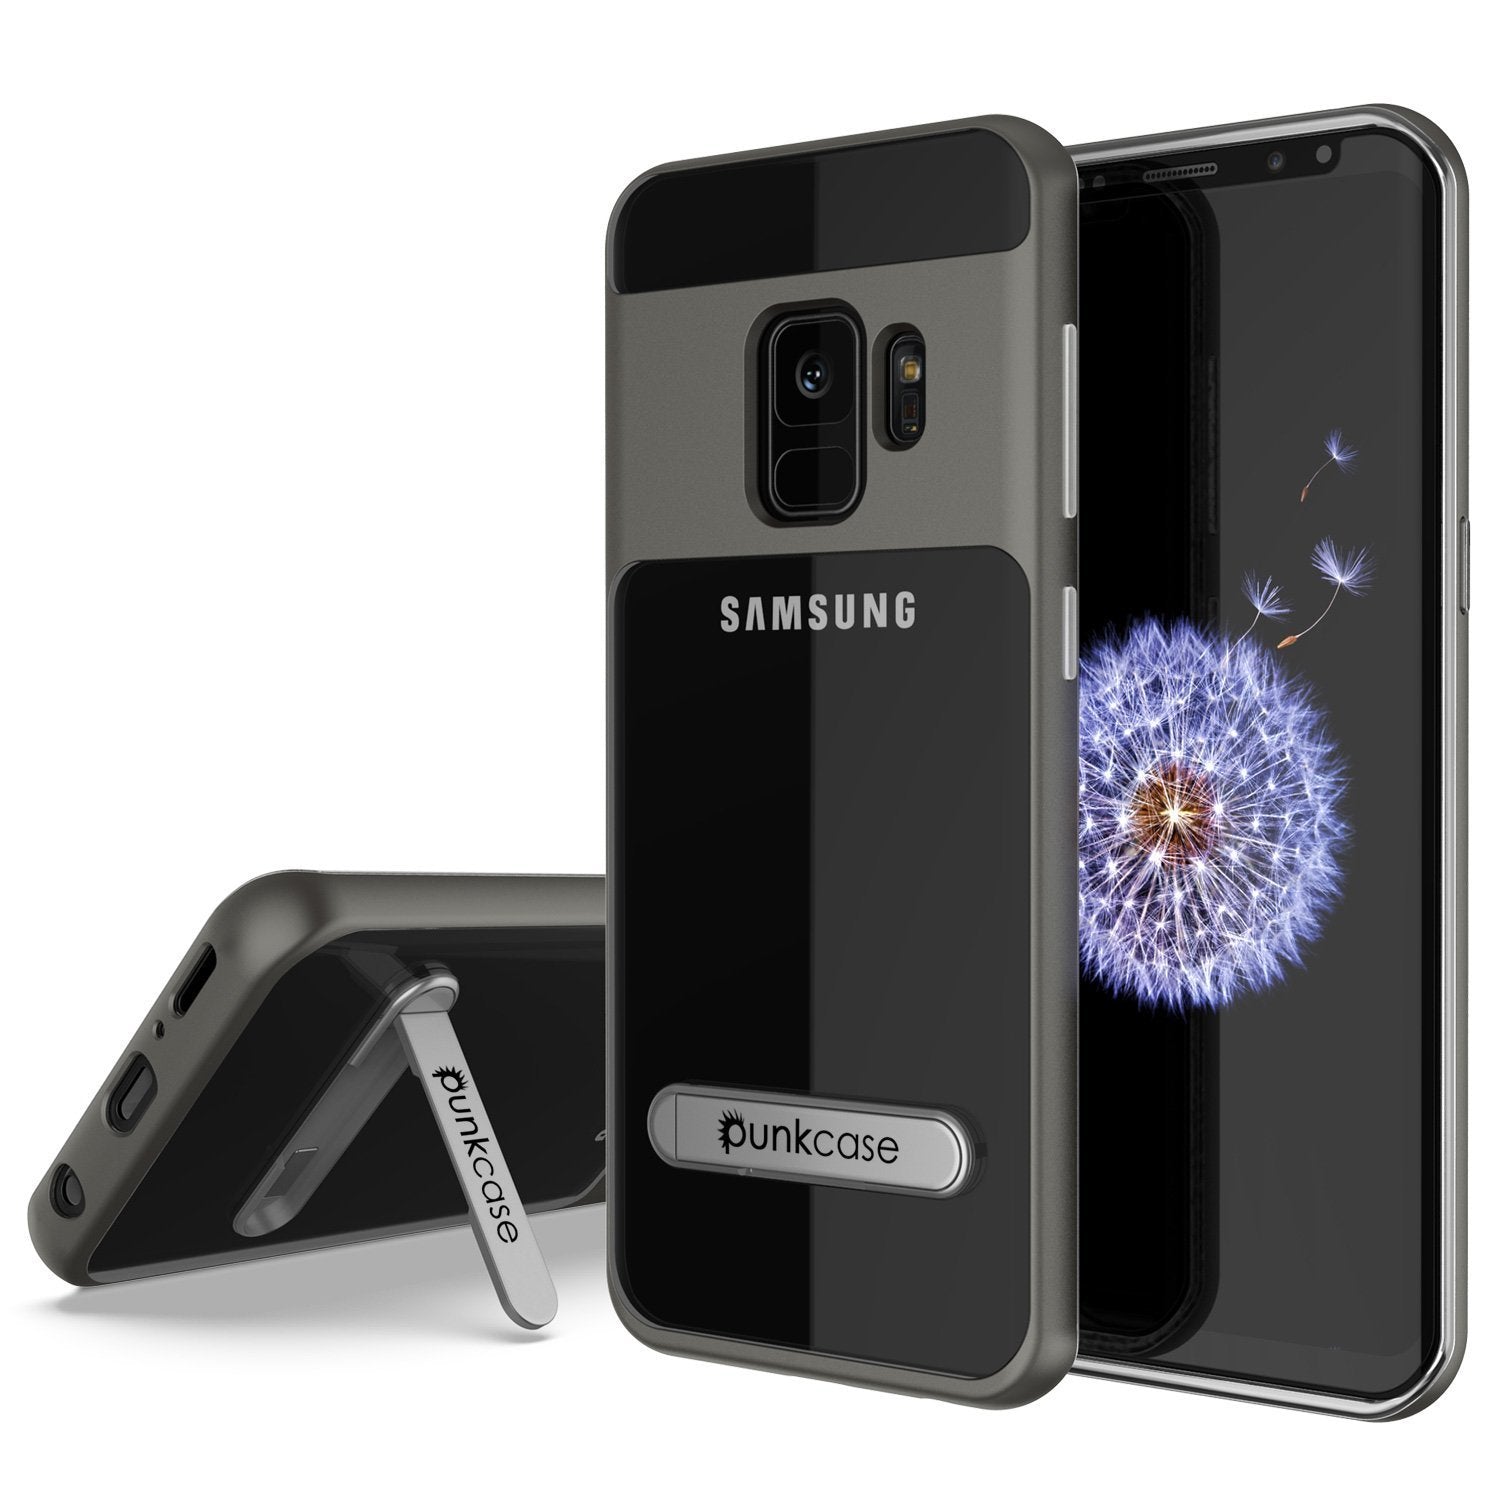 Galaxy S9 Case, PUNKcase [LUCID 3.0 Series] [Slim Fit] [Clear Back] Armor Cover w/ Integrated Kickstand, Anti-Shock System & PUNKSHIELD Screen Protector for Samsung Galaxy S9 [Grey]